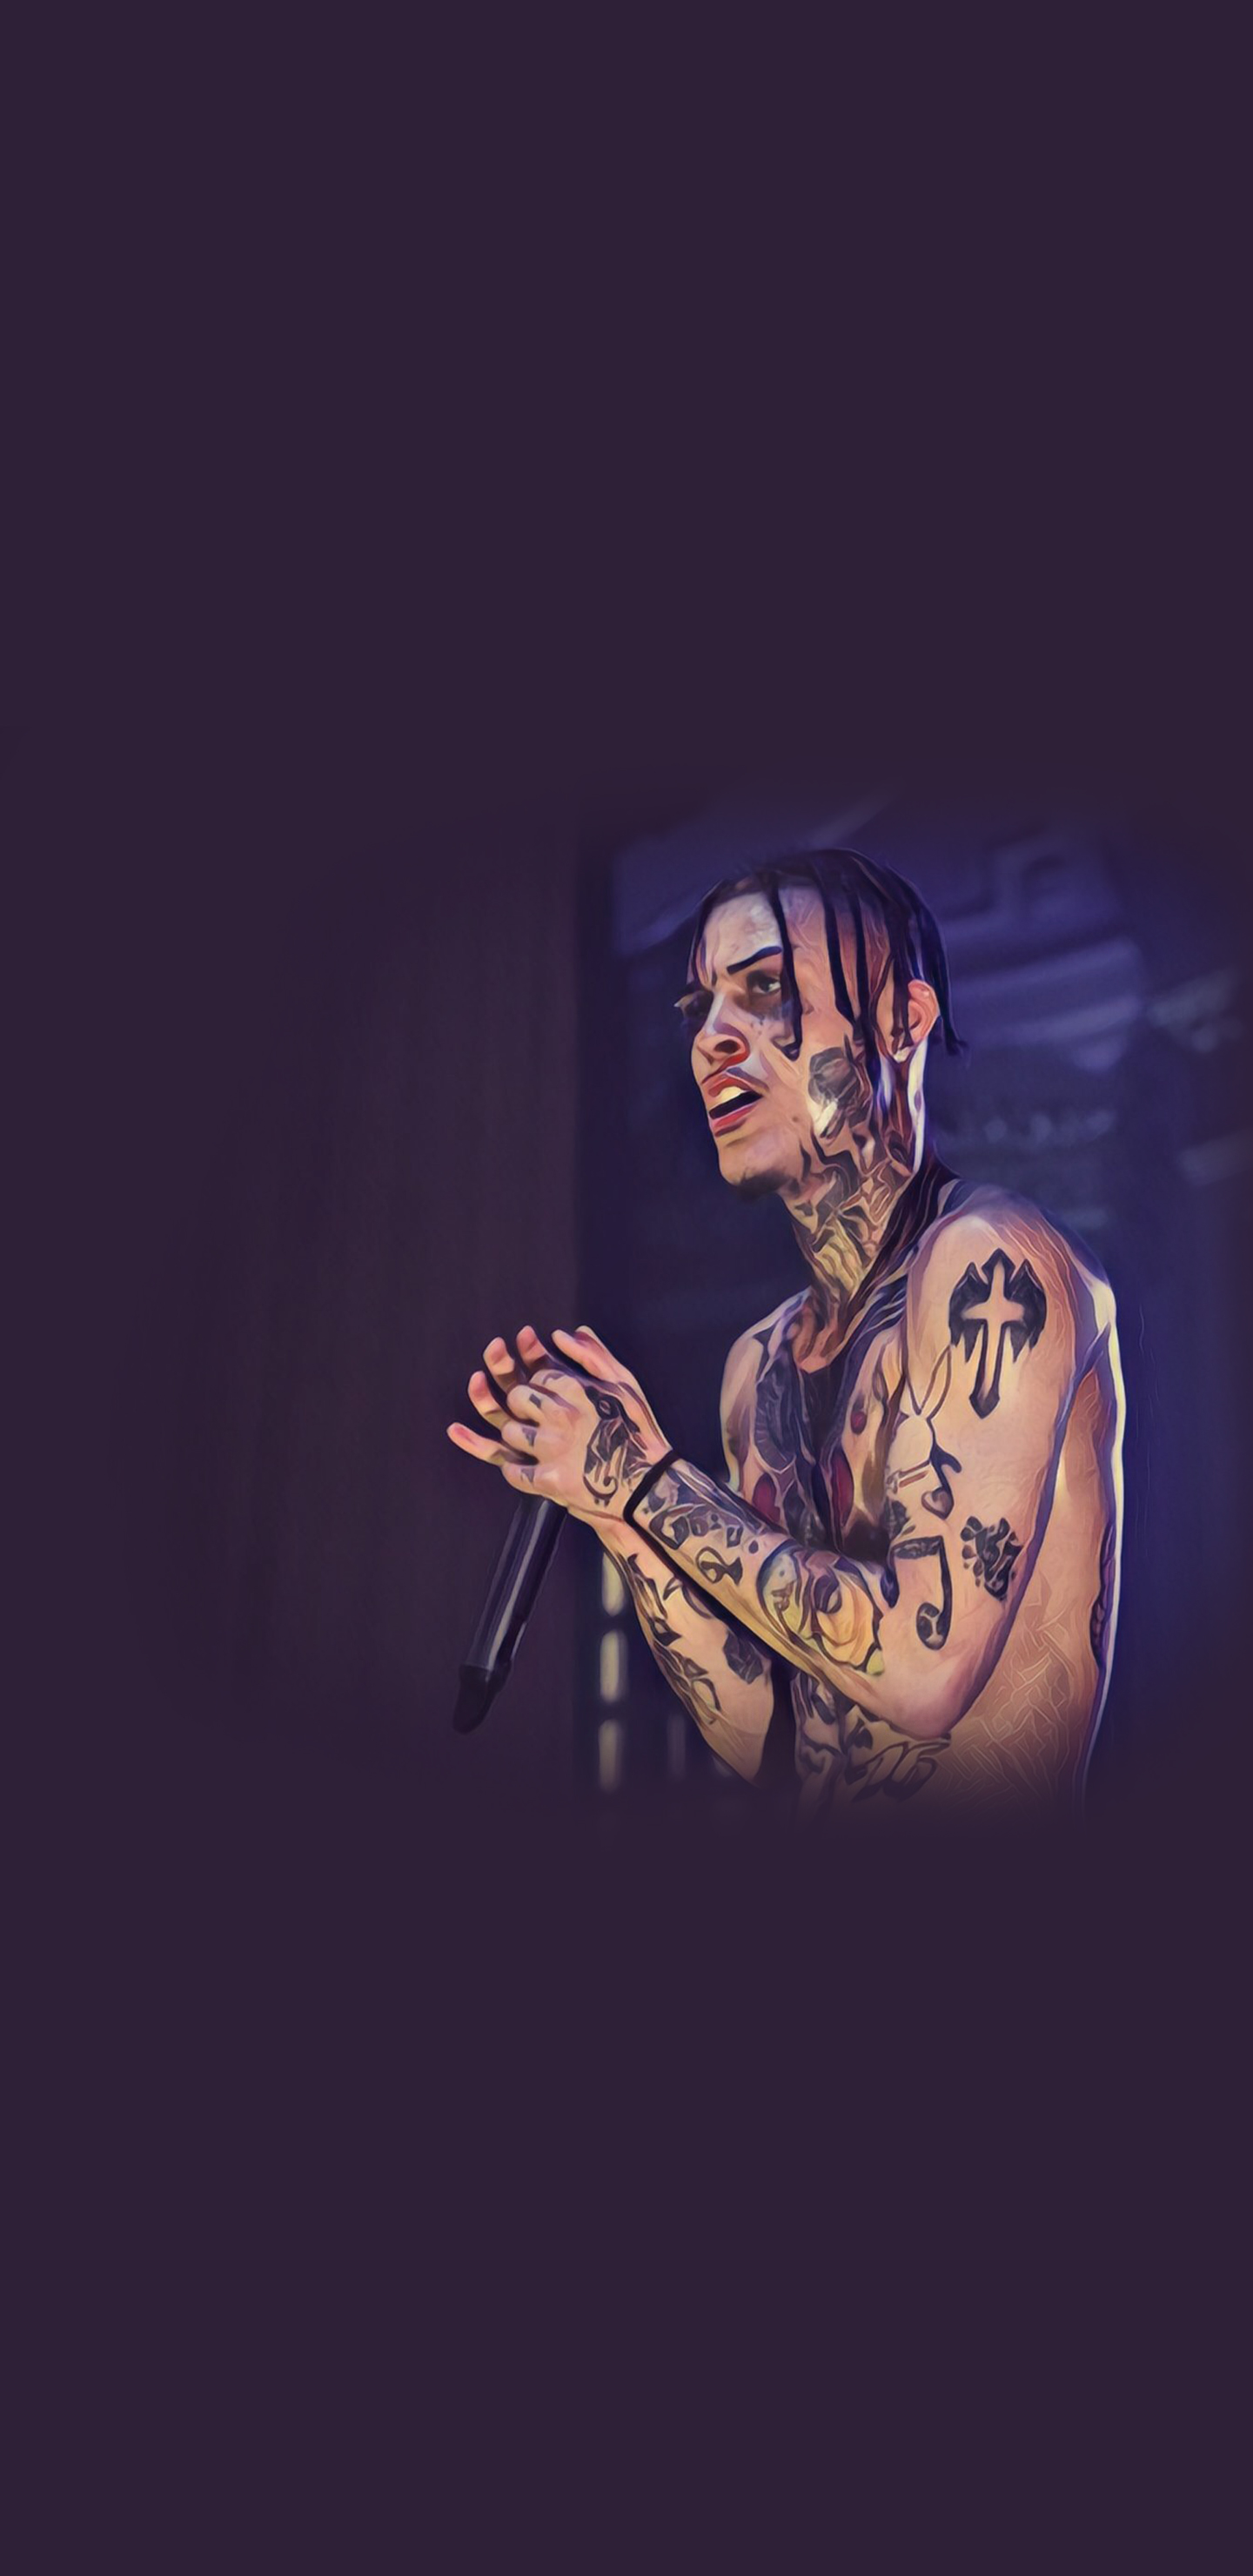 Lil Skies Wallpapers For Desktop And Mobile In Hd Resolution